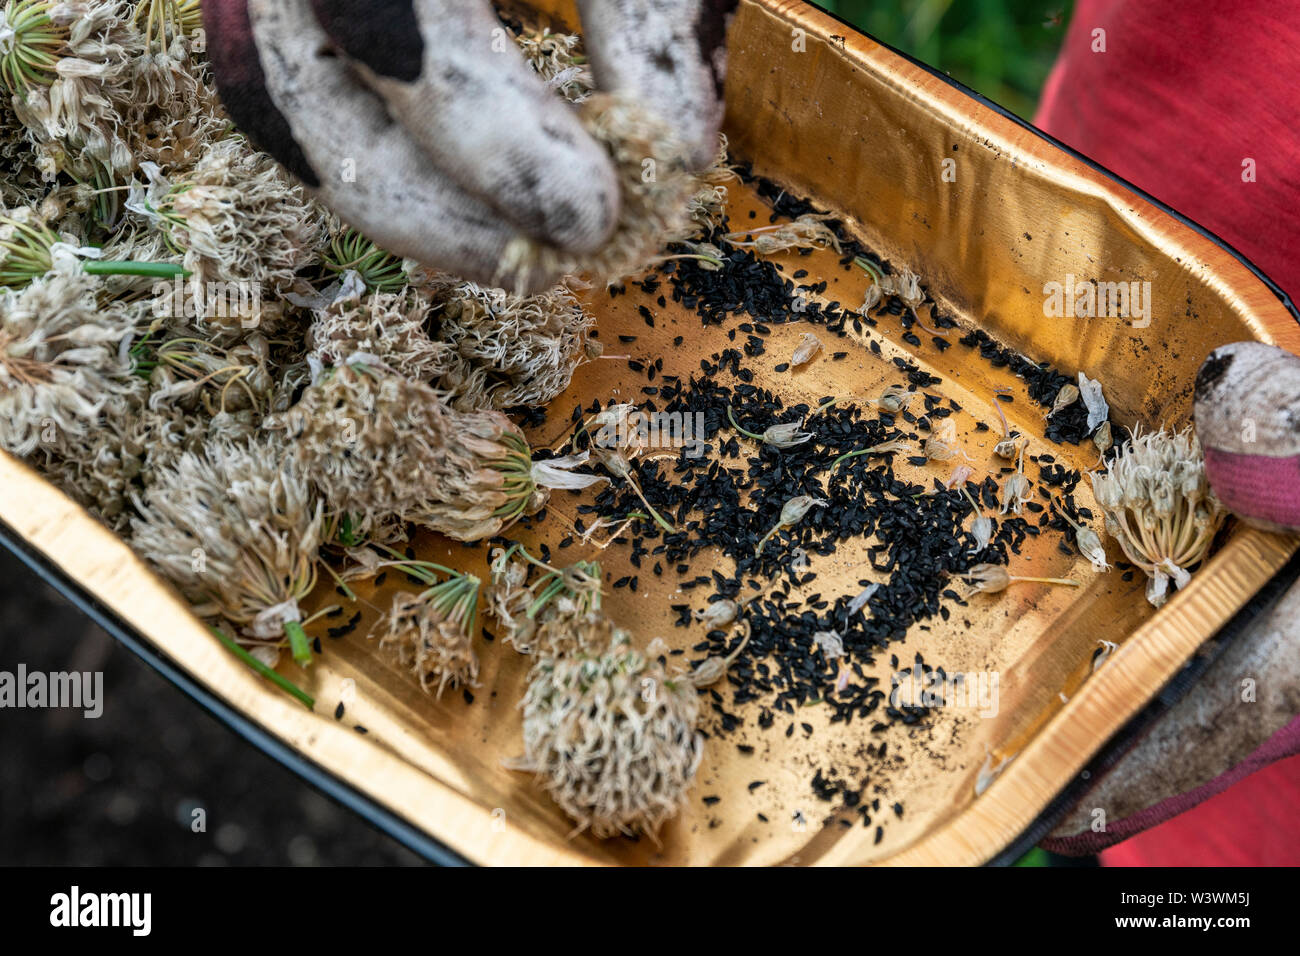 Close up of women pulling seeds from the flowers of chives to plant in her vegetable garden. Stock Photo